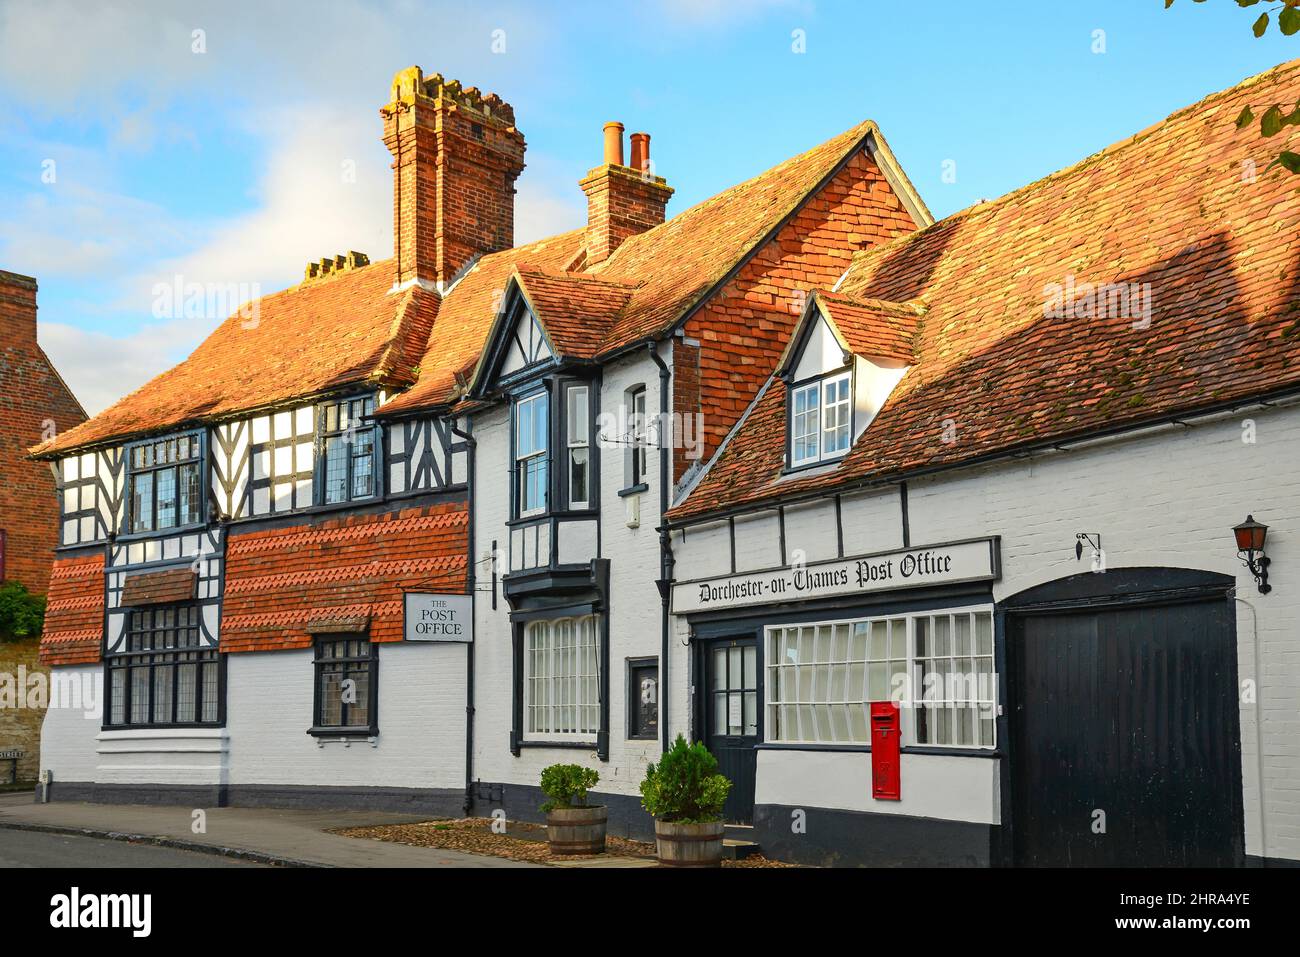 The Old Post Office, High Street, Dorchester-on-Thames, Oxfordshire, England, United Kingdom Stock Photo